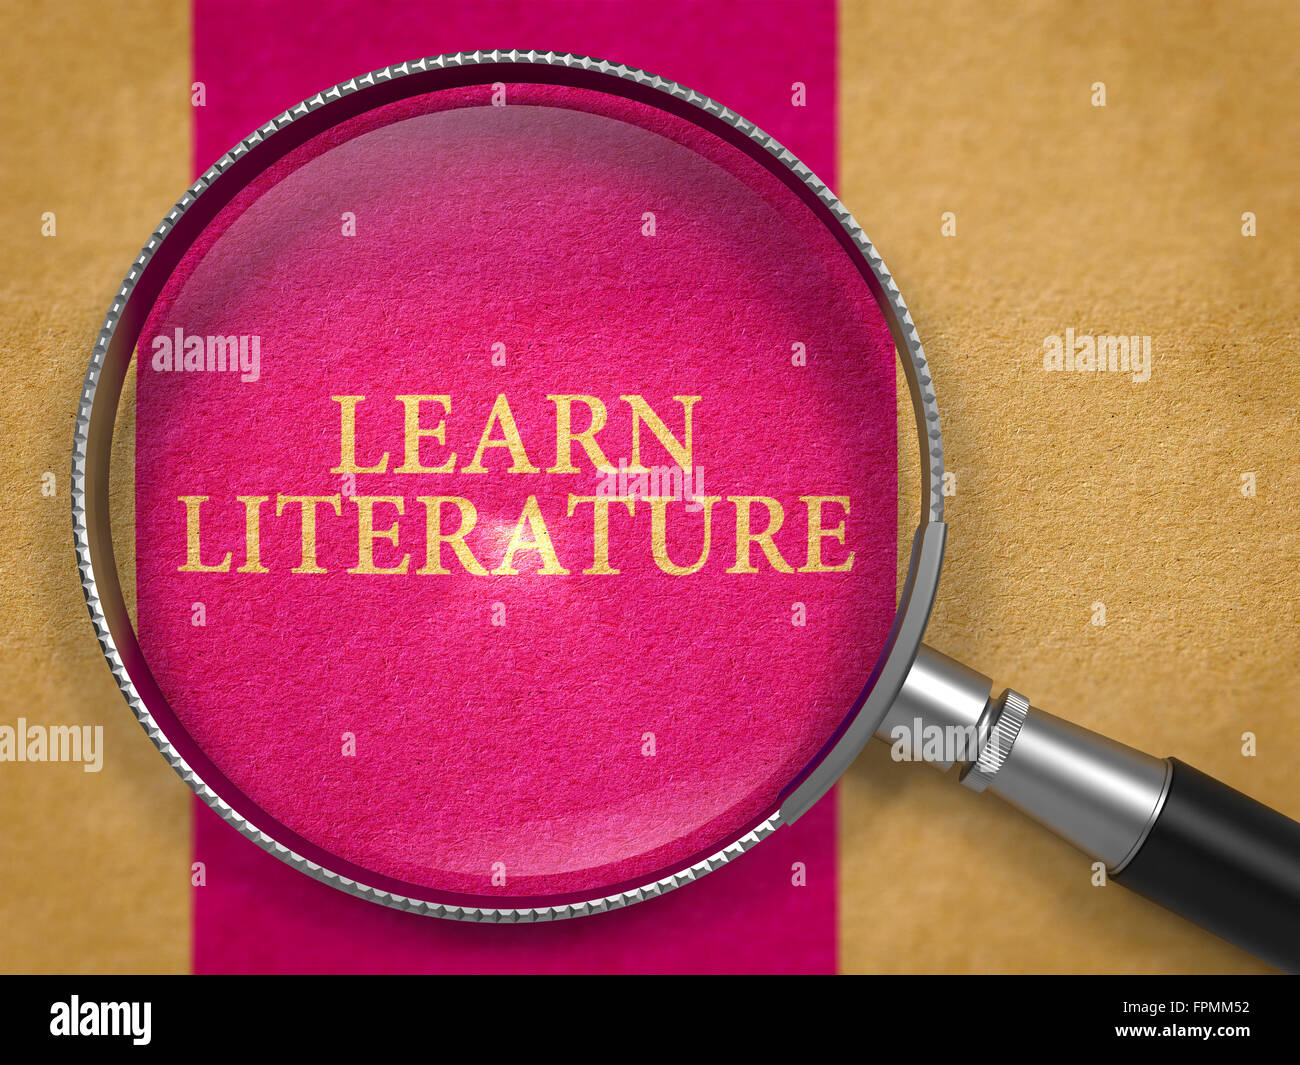 Learn Literature through Loupe on Old Paper. Stock Photo